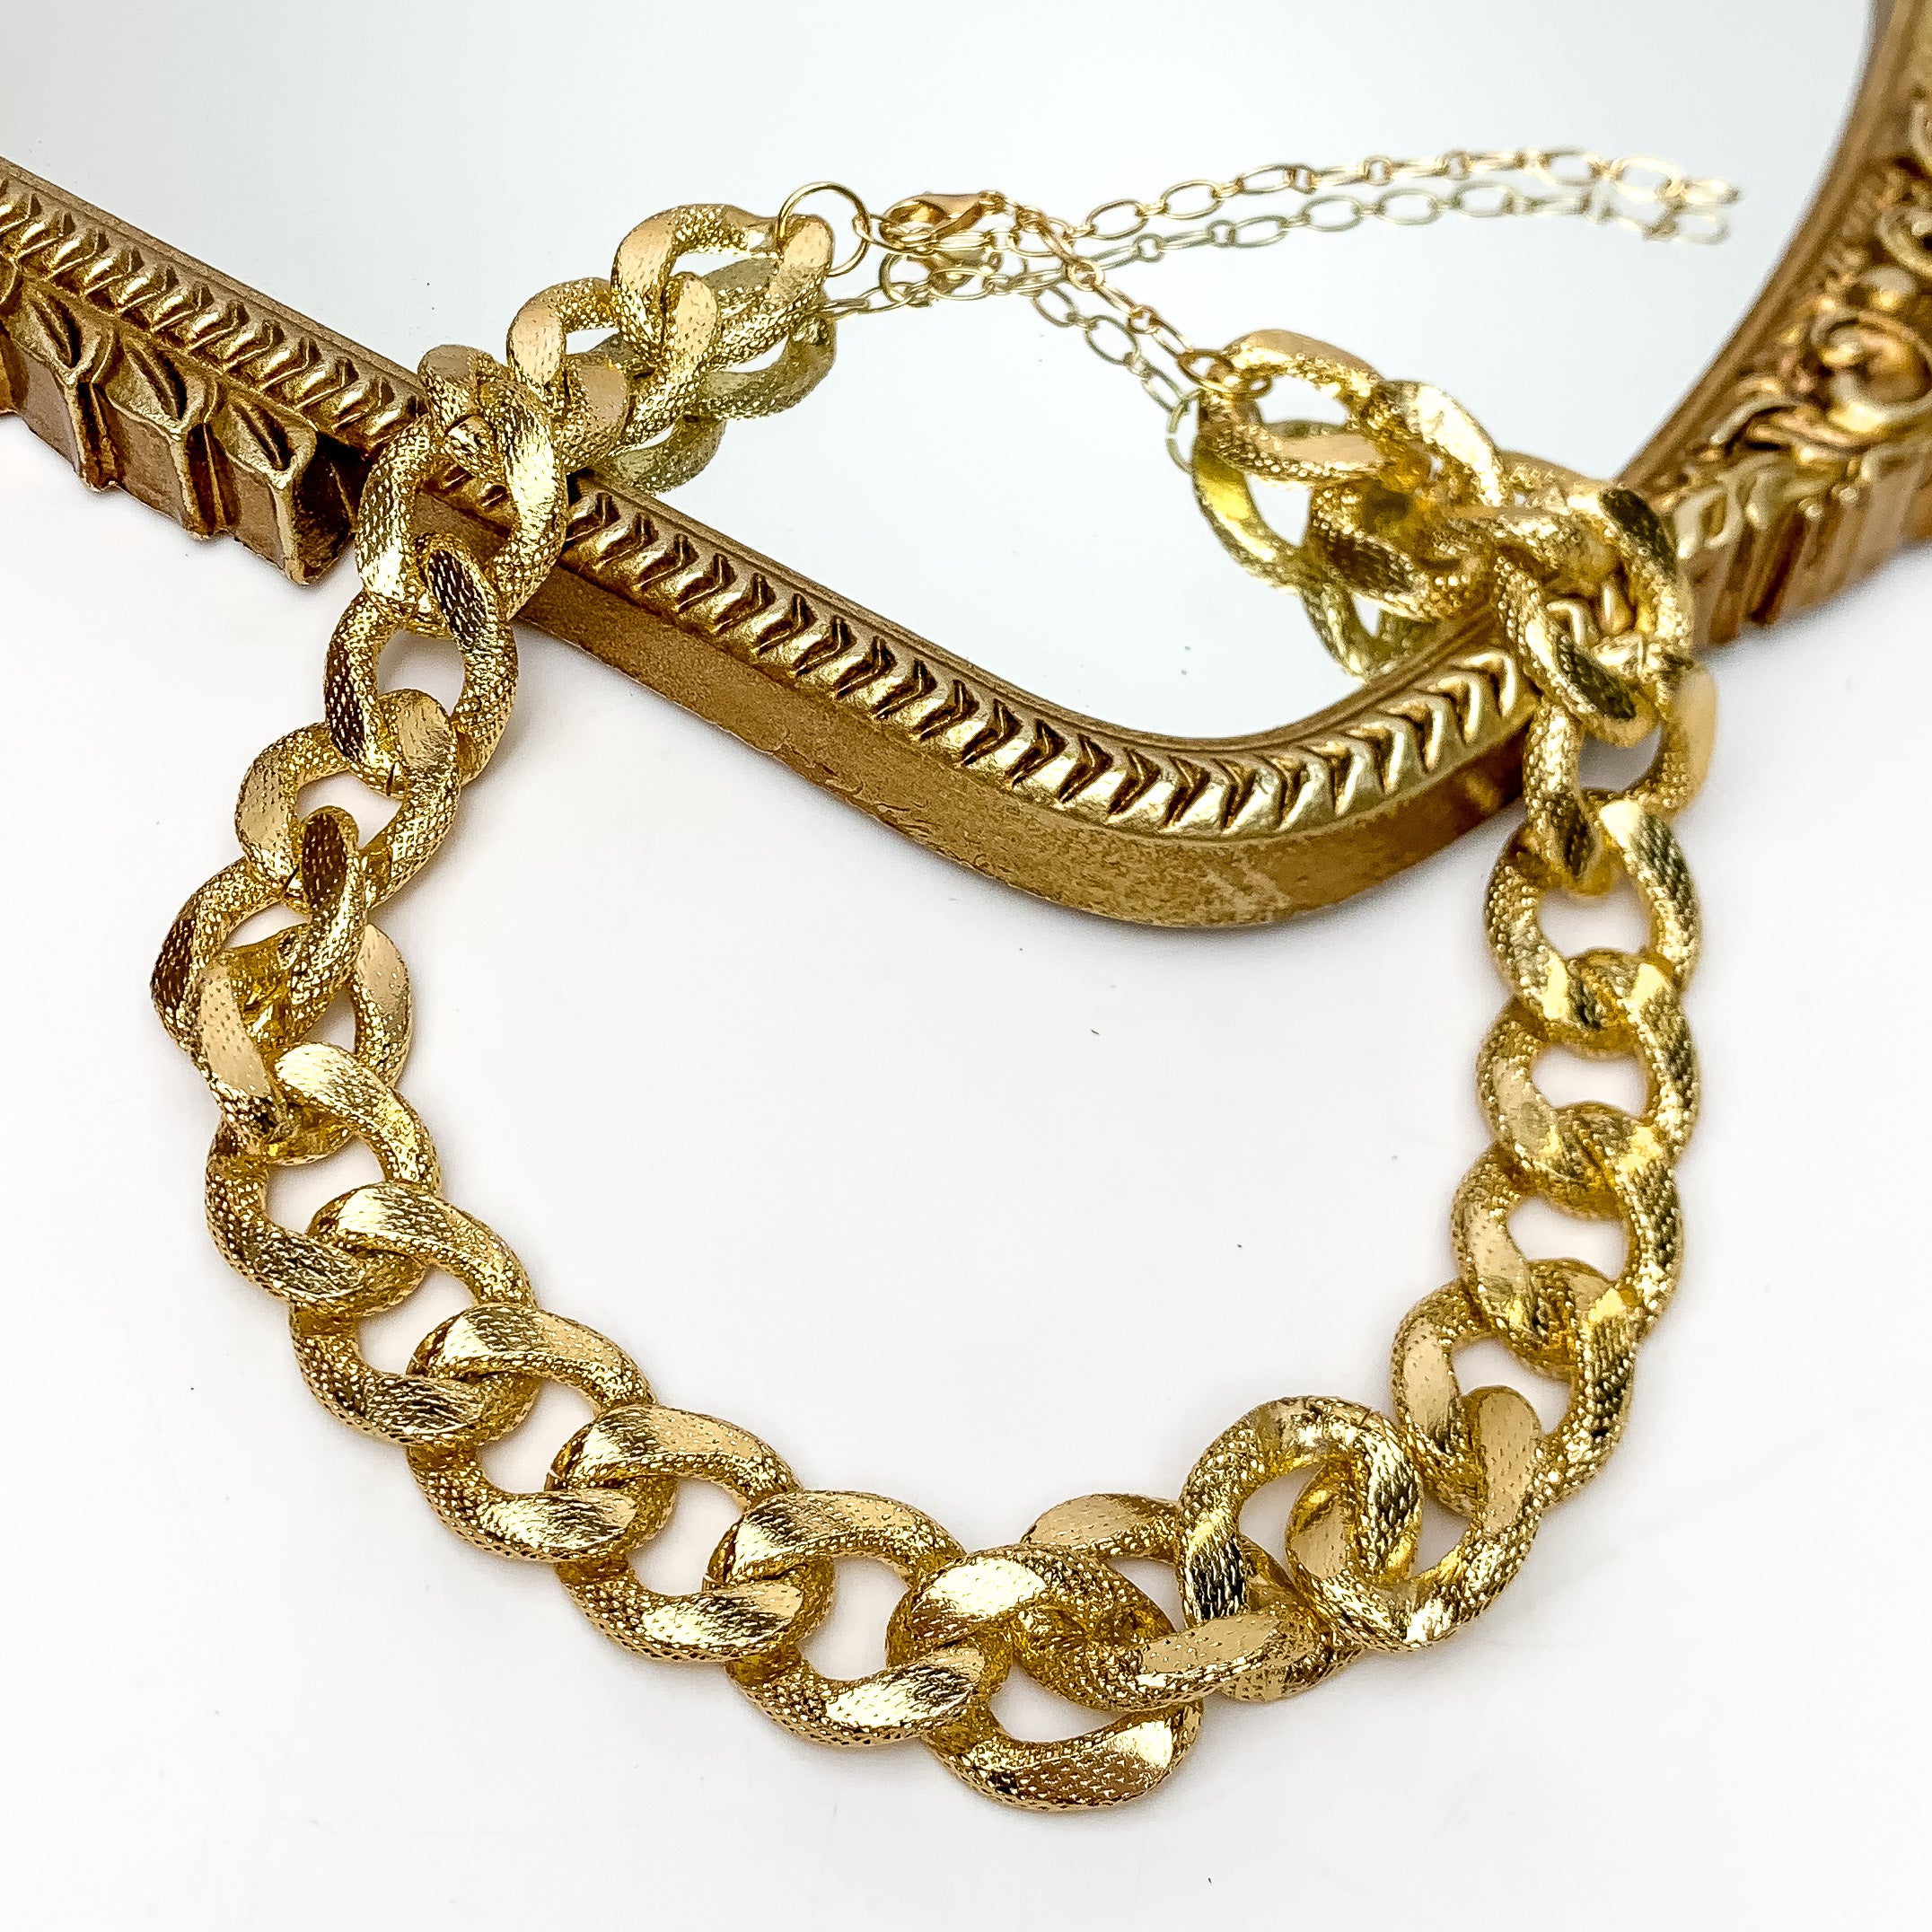 The Go To Gold Tone Chain Necklace. This necklace is pictured on a white background with part of the chain on a gold trimmed mirror.